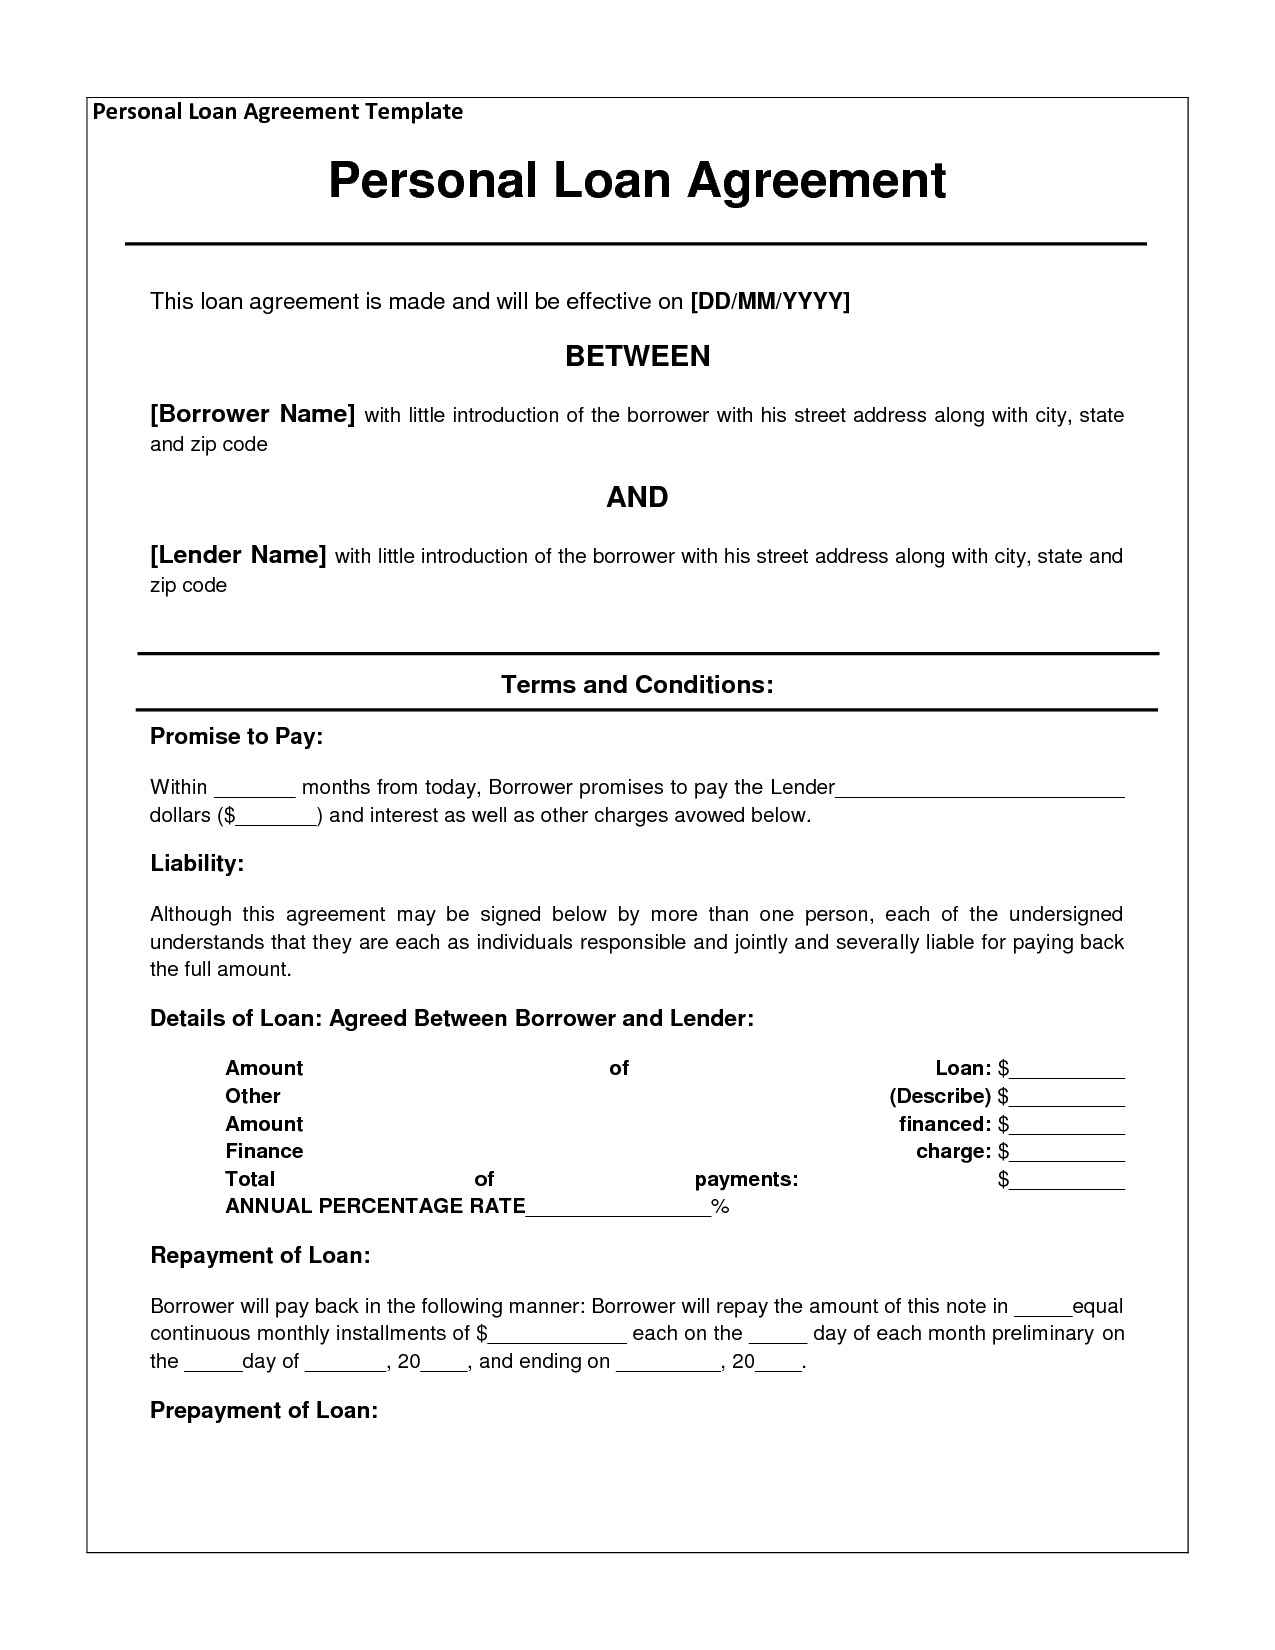 Wonderful Personal Loan Agreement And Loan Contract Template 